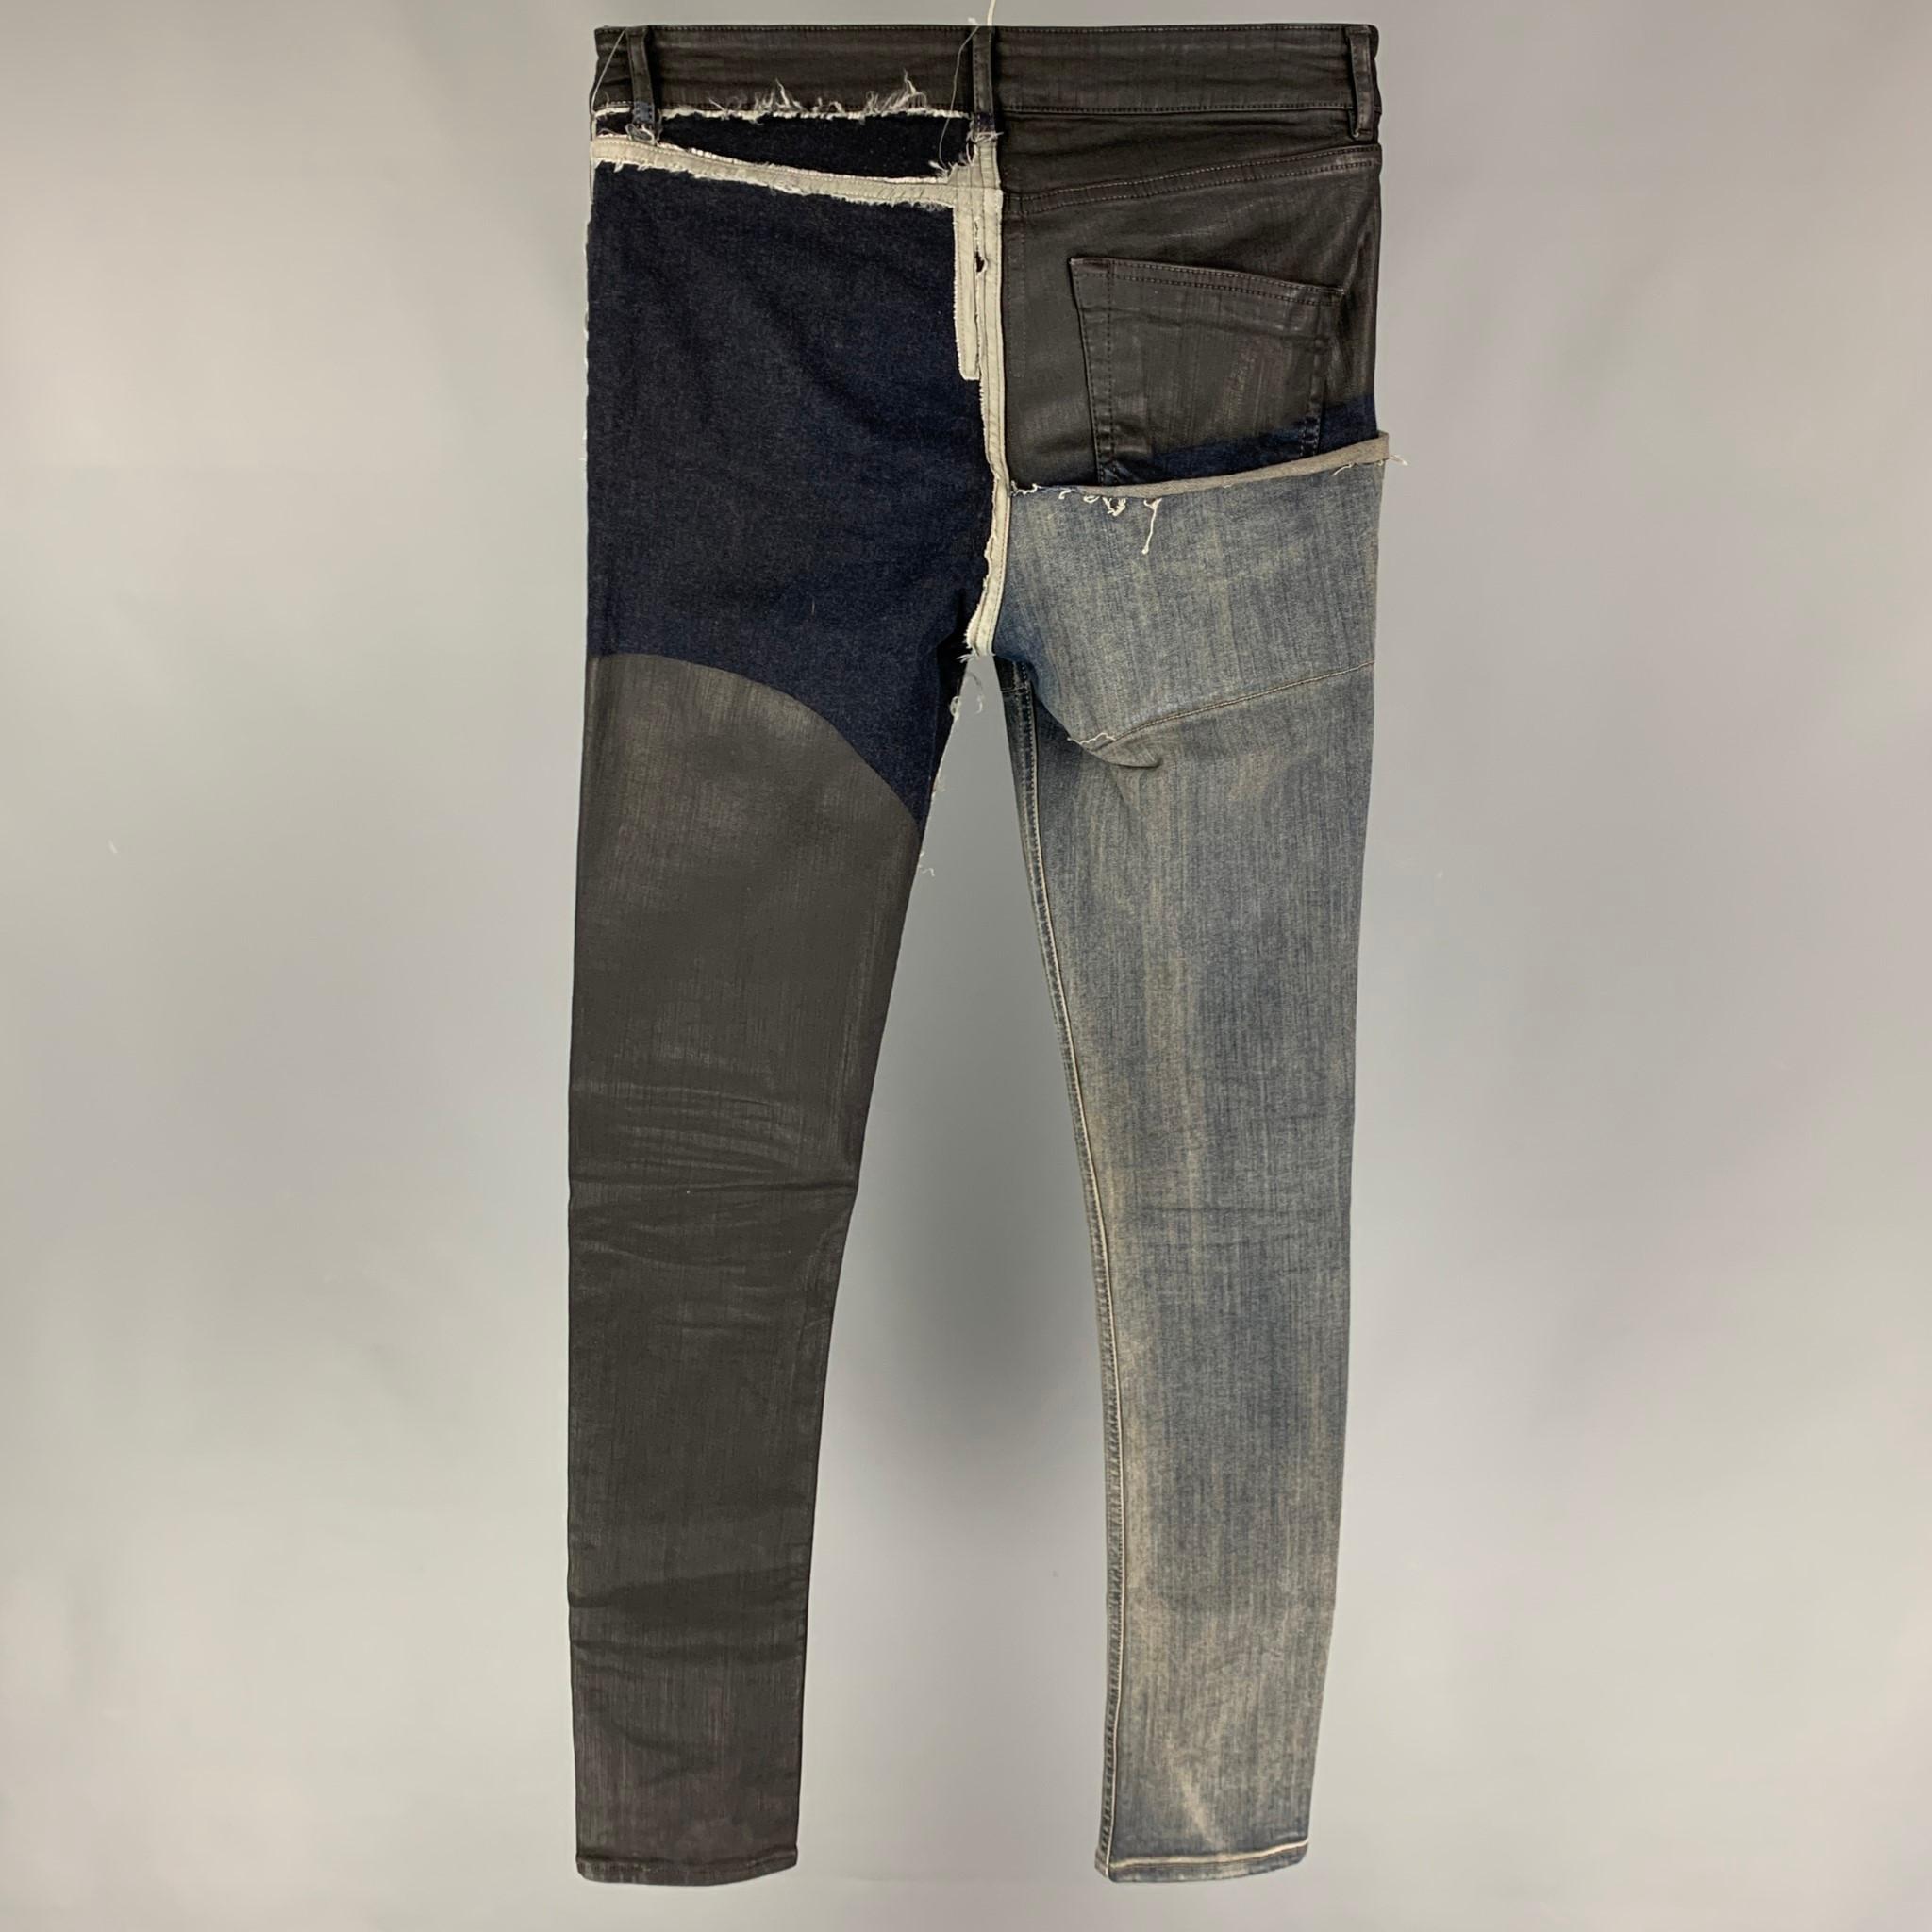 RICK OWENS 'Tyrone' SS 19 jeans comes in a blue denim with black waxed patchwork featuring a skinny fit, distressed, and a button fly closure. Made in Italy. 

Very Good Pre-Owned Condition.
Marked: 30

Measurements:

Waist: 30 in.
Rise: 10